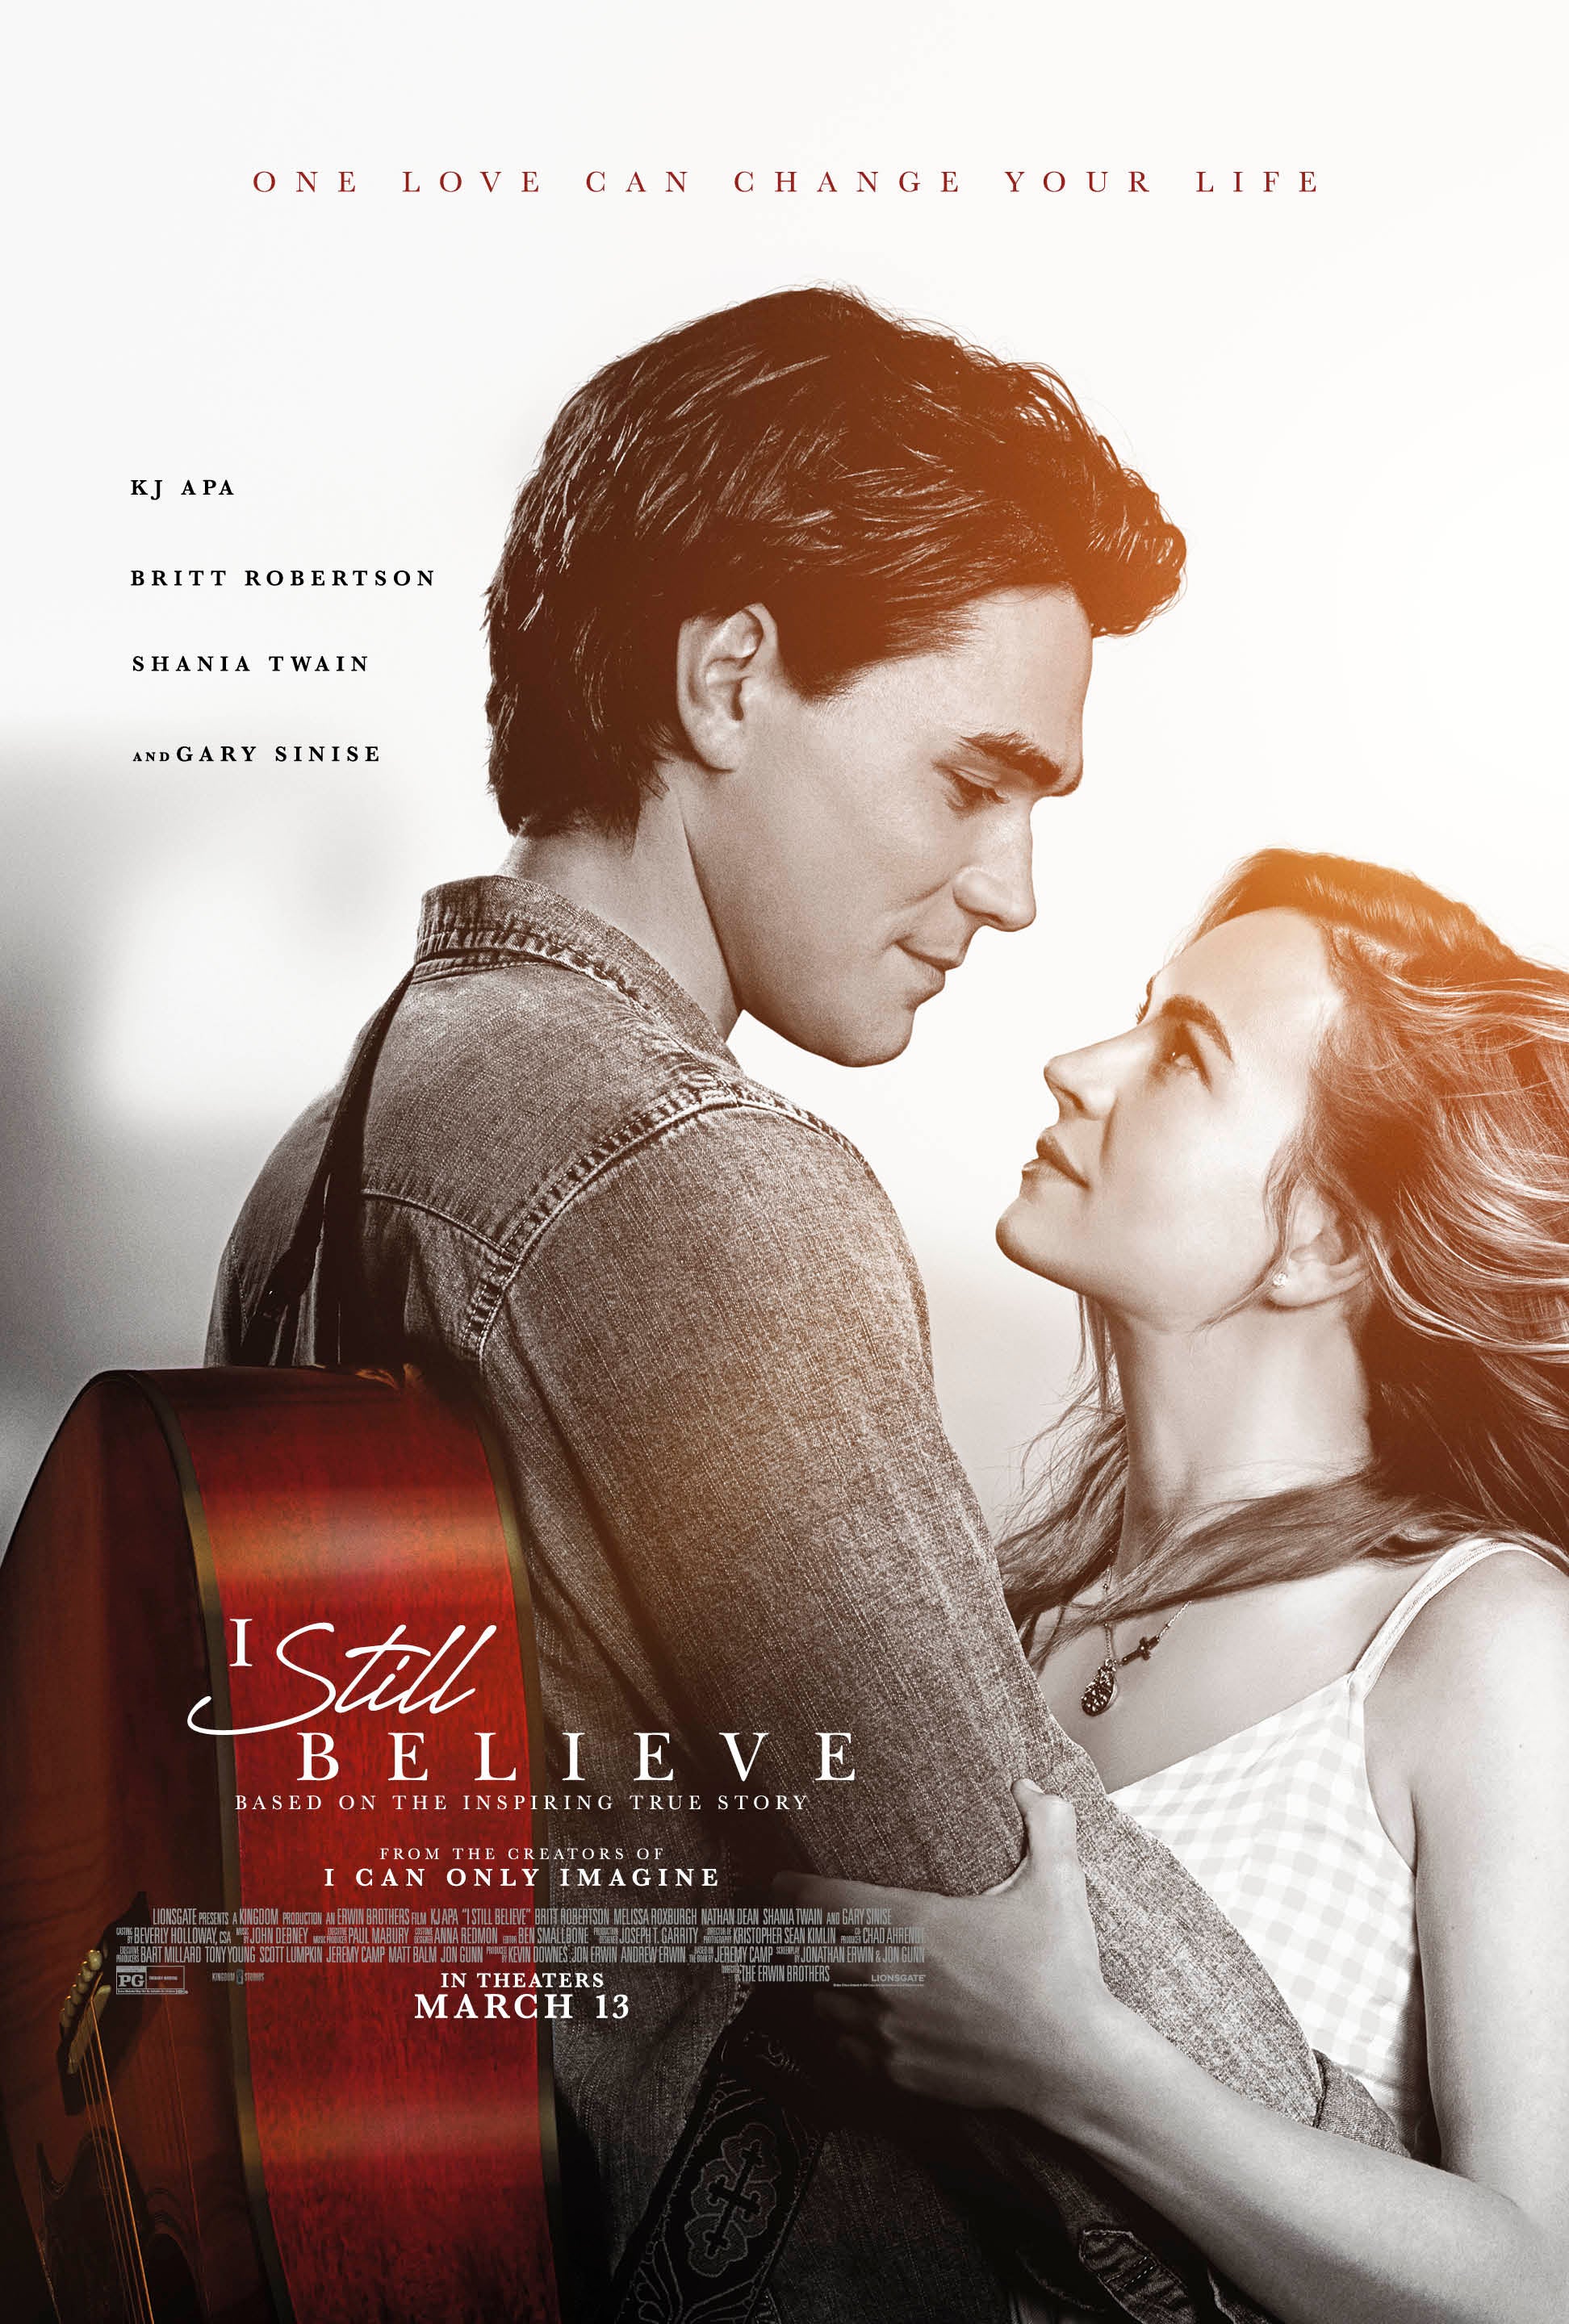 Watch KJ Apa Propose to Britt Robertson in an Exclusive Clip From I Still Believe Entertainment Tonight pic picture